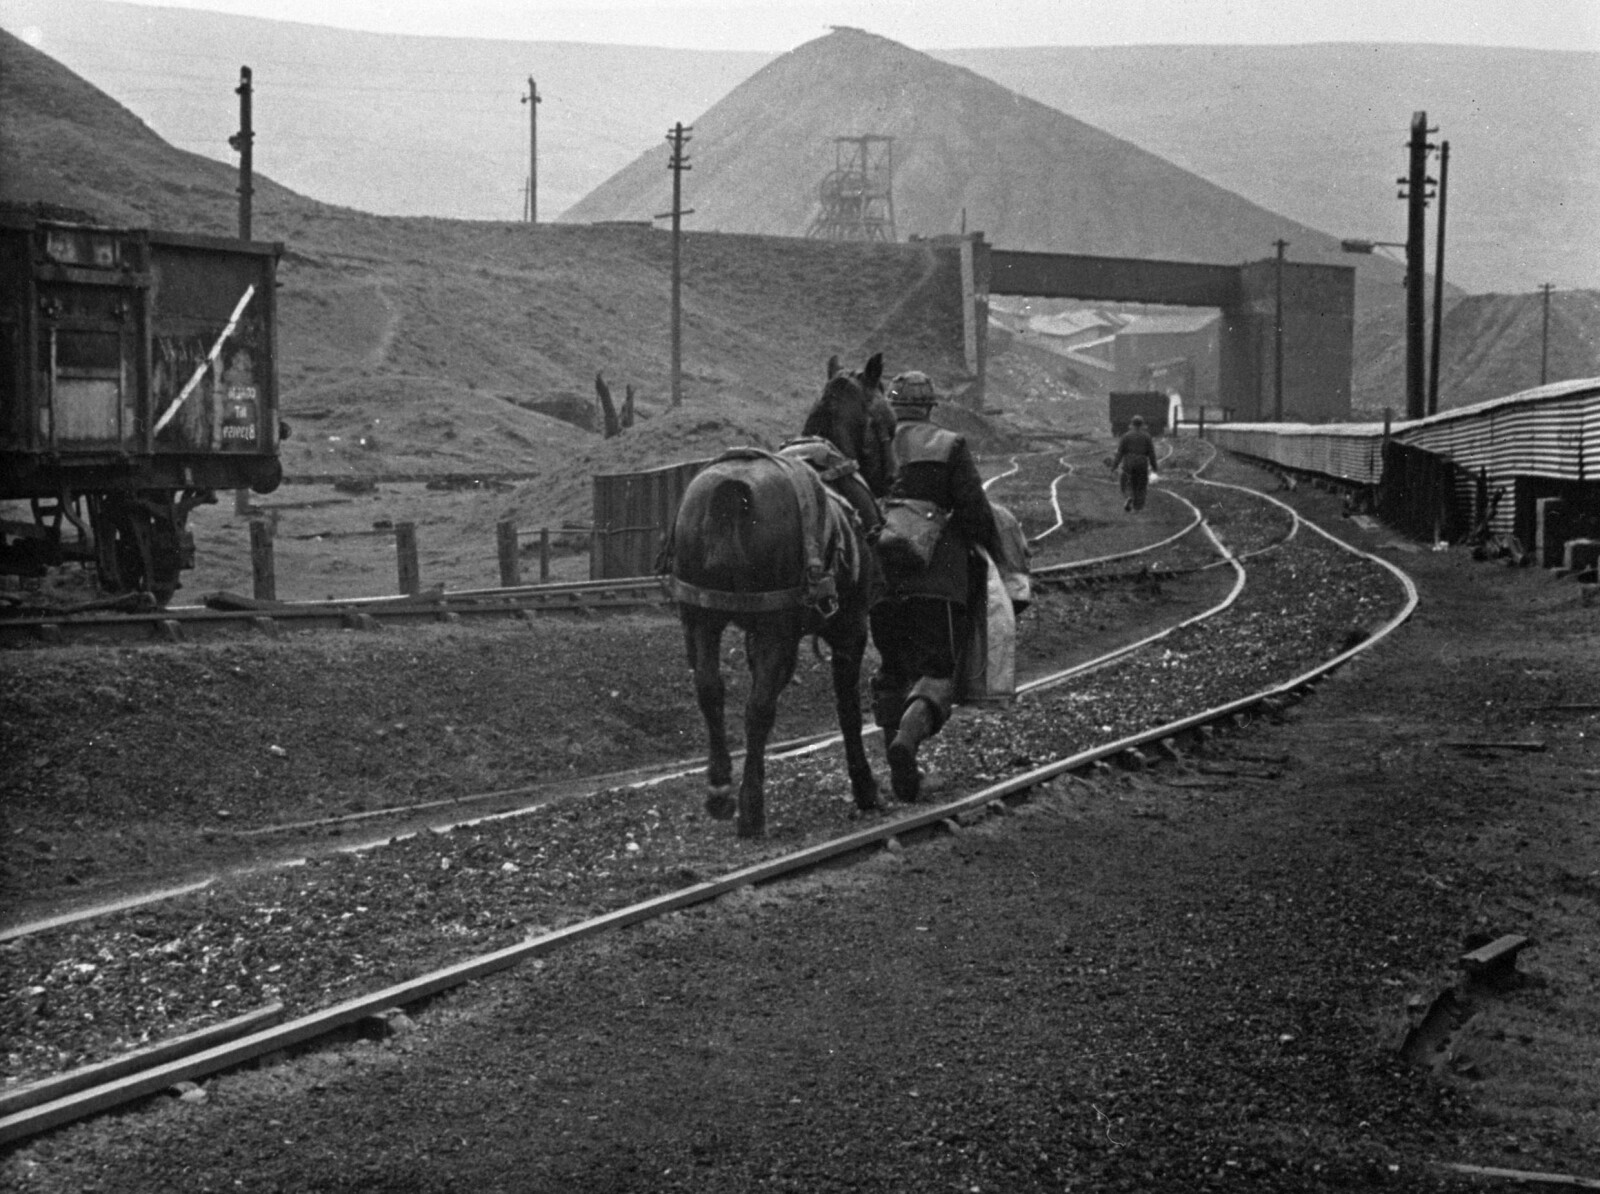 Colliery horse returning to Big Pit surface stables from the Washery in 1968.